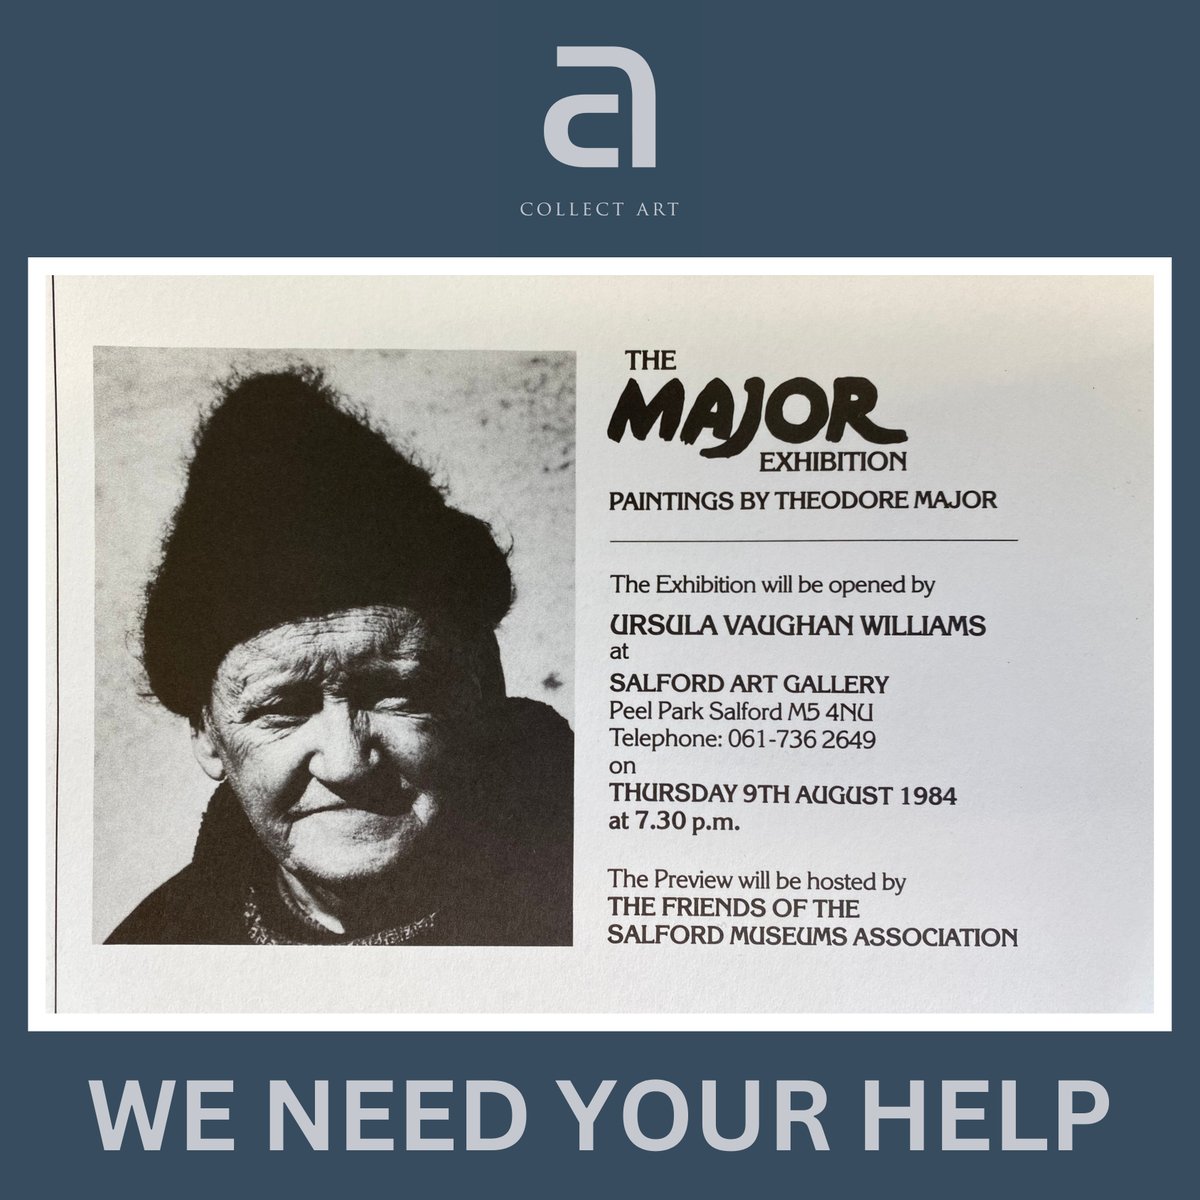 We are appealing to anyone who may have photographs or even possibly video footage of an exhibition by #TheodoreMajor at Salford Art Gallery in 1984.

Read our latest blog for more information...
collectart.co.uk/post/help-want…
#SalfordArtGallery